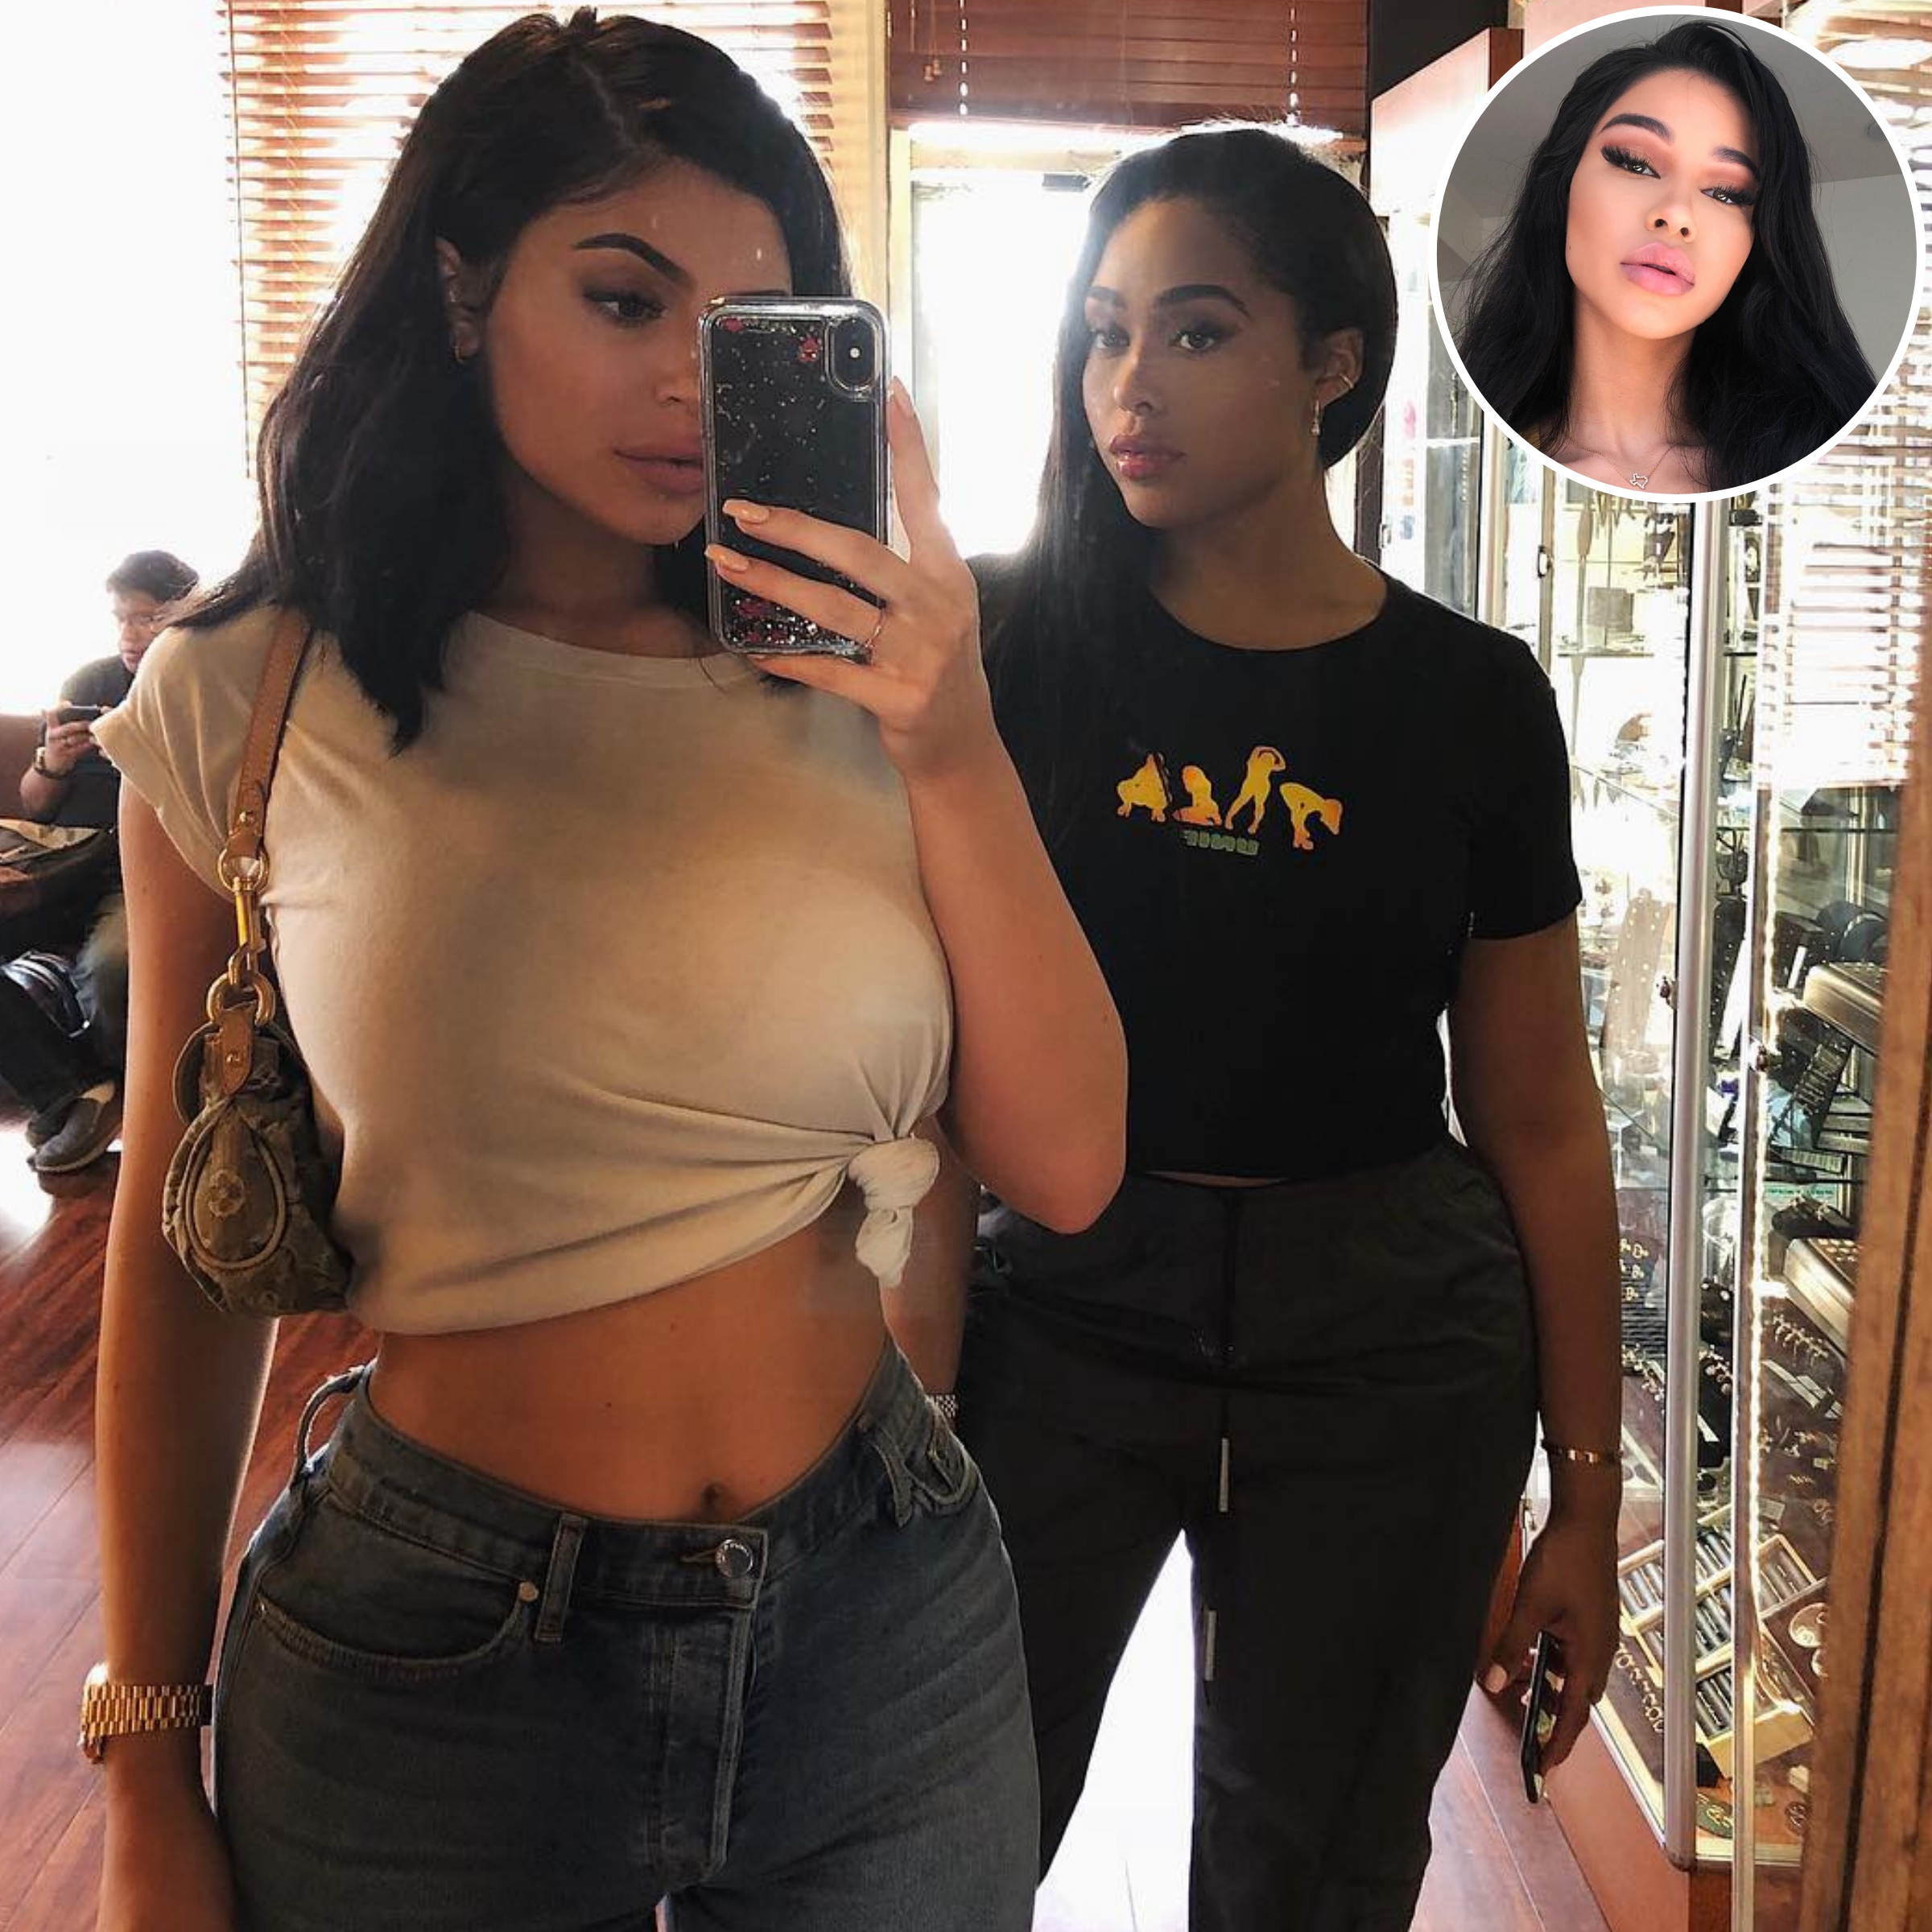 Photos from Kylie Jenner and Jordyn Woods' Friendship Through the Years